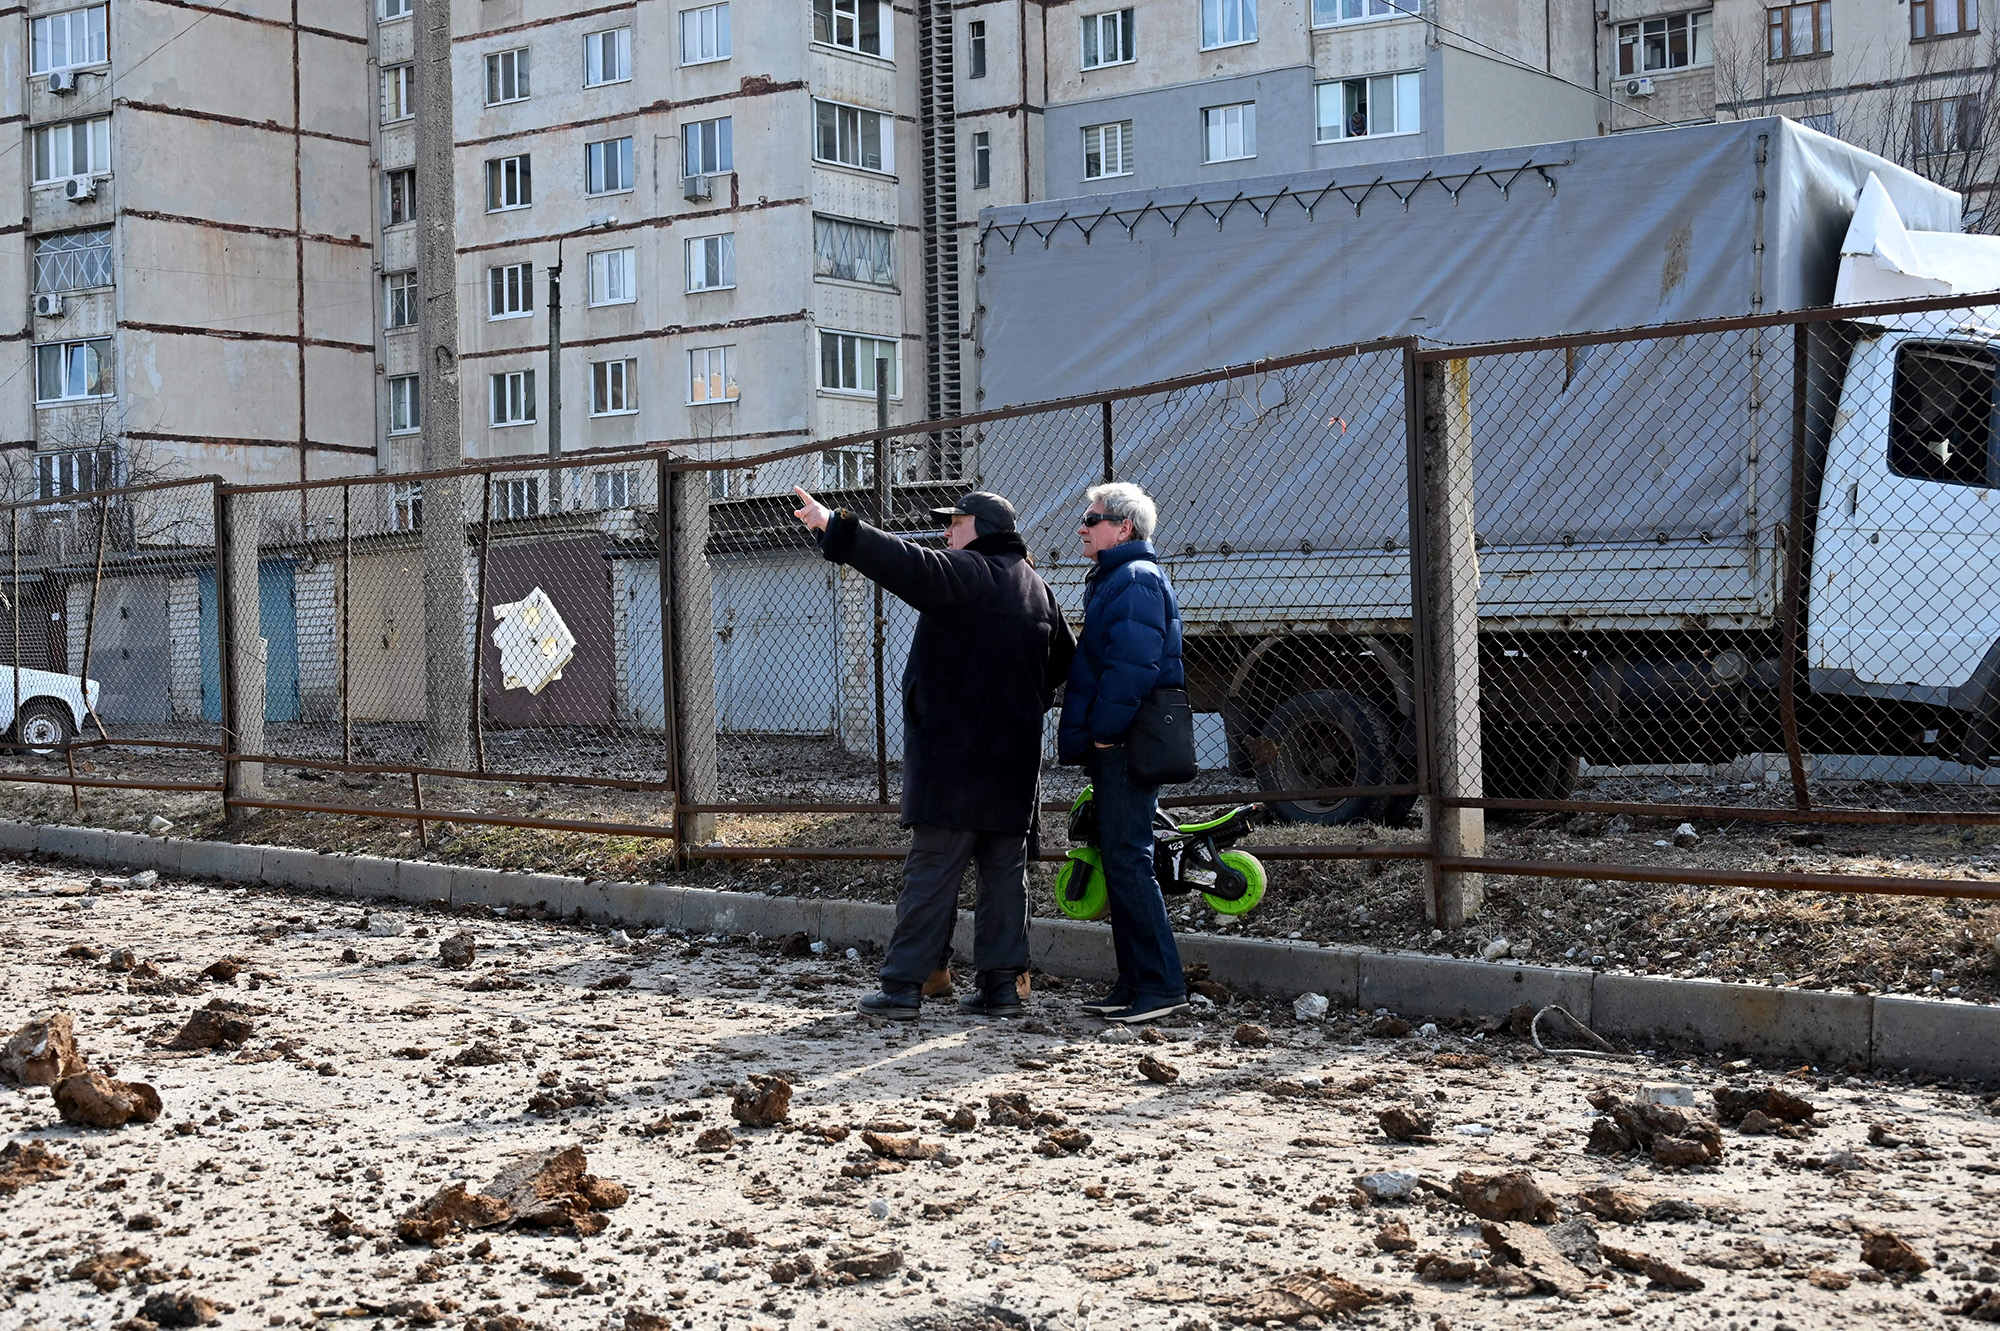 Ukrainian residents stand amid debris after a Russian missile strike in the city of Kharkiv, Ukraine, on March 15.